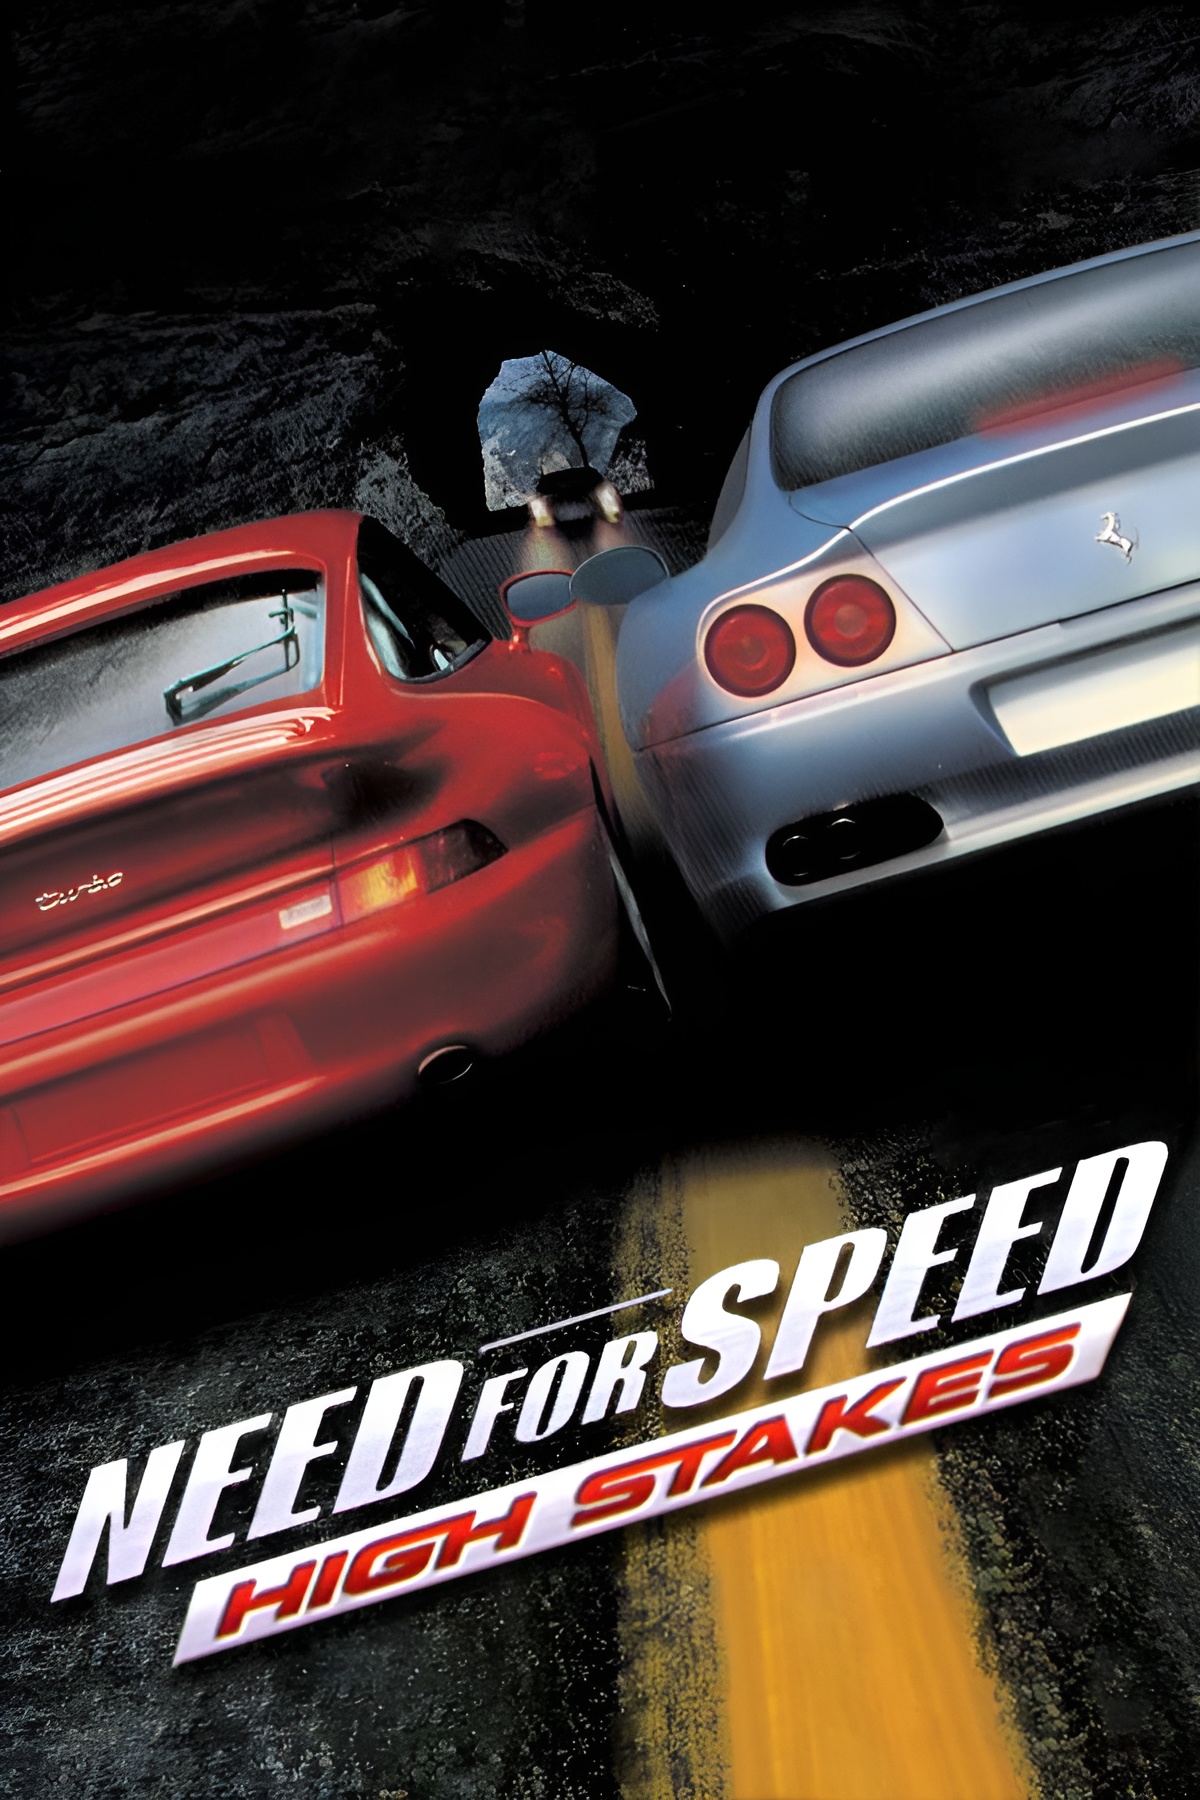 Playthrough [PS1] Need for Speed 4: High Stakes - Complete Edition